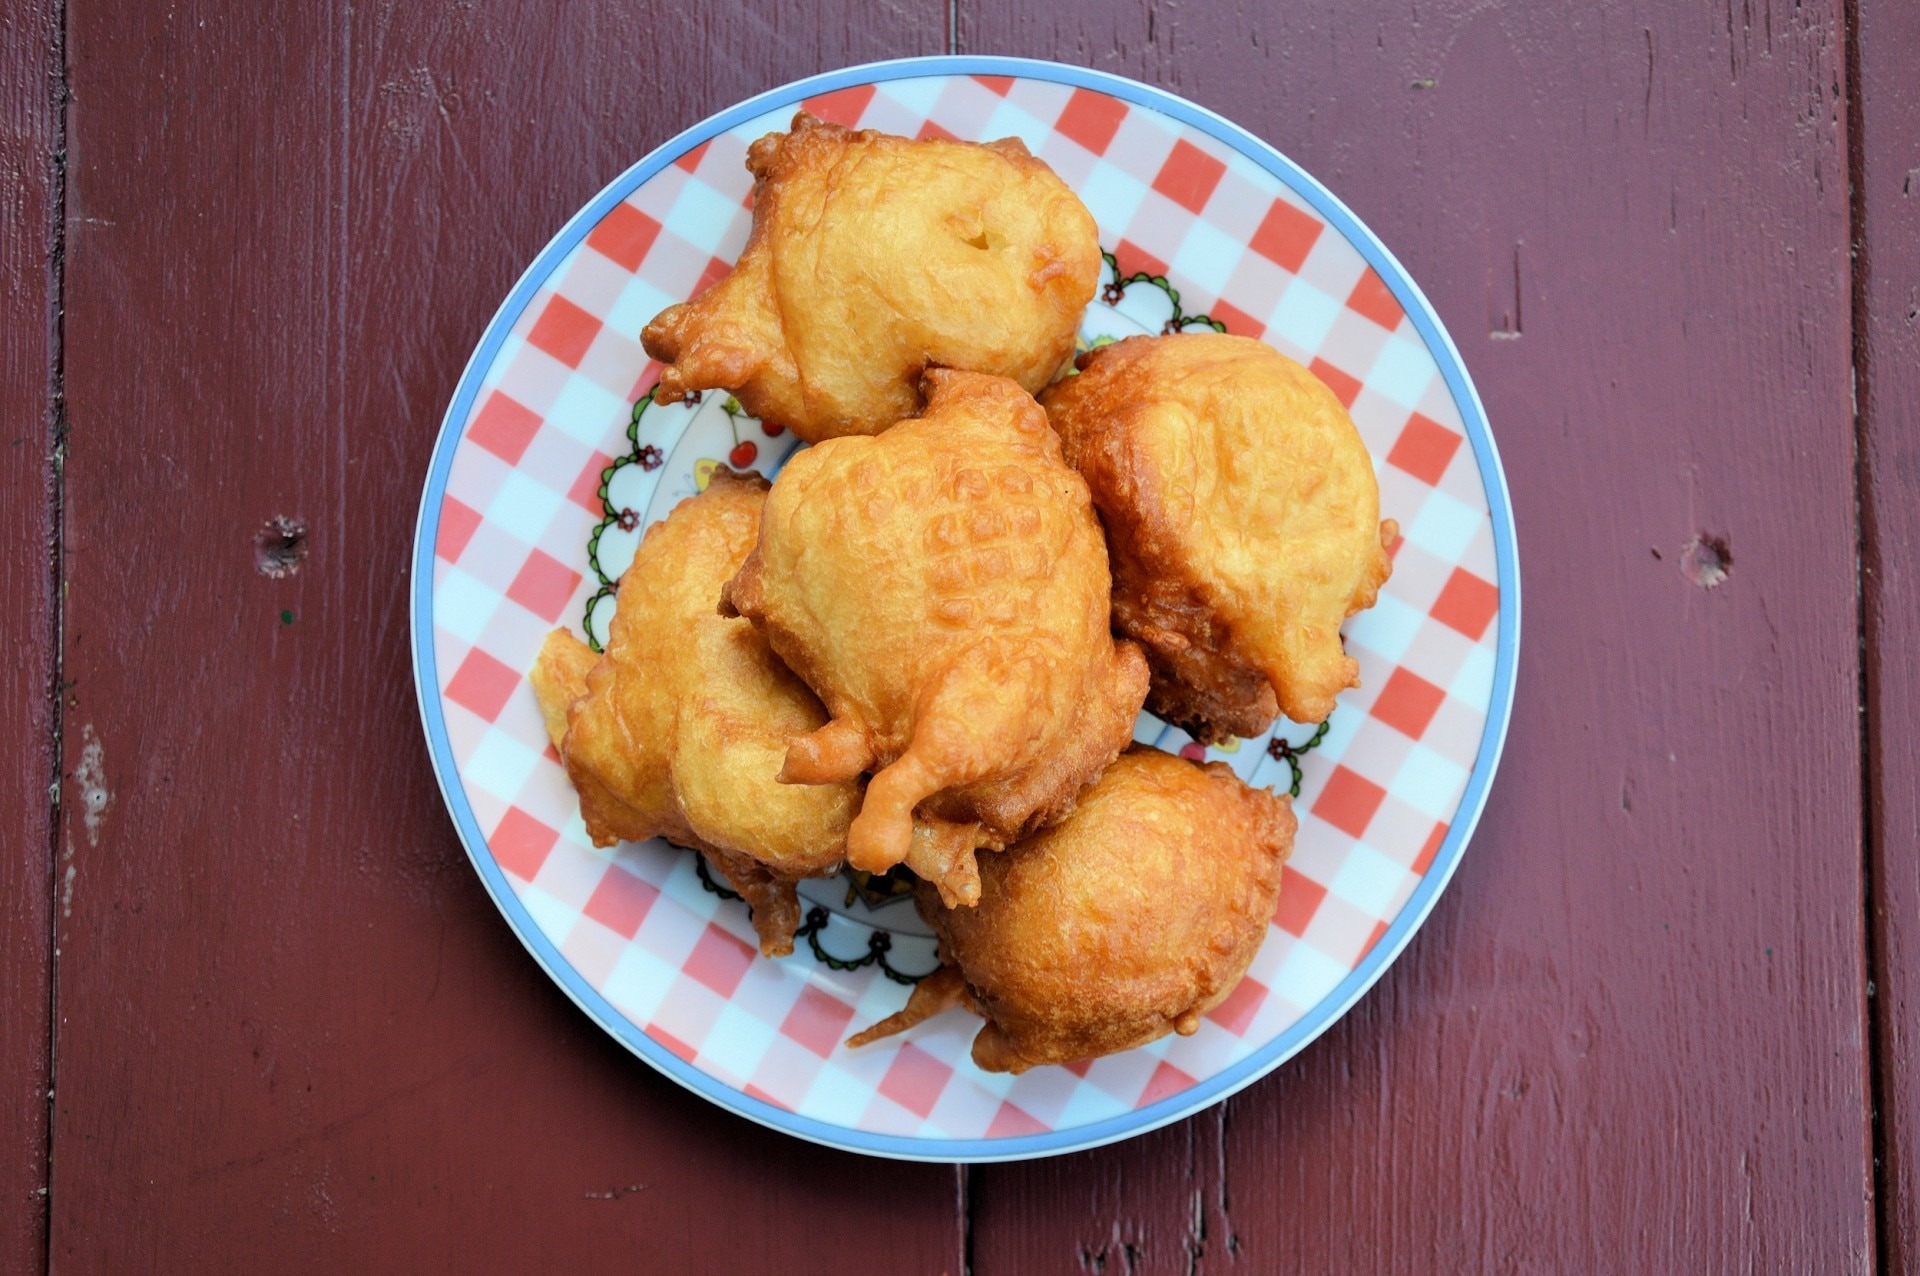 5 fried chickens on white and red ceramic round plate